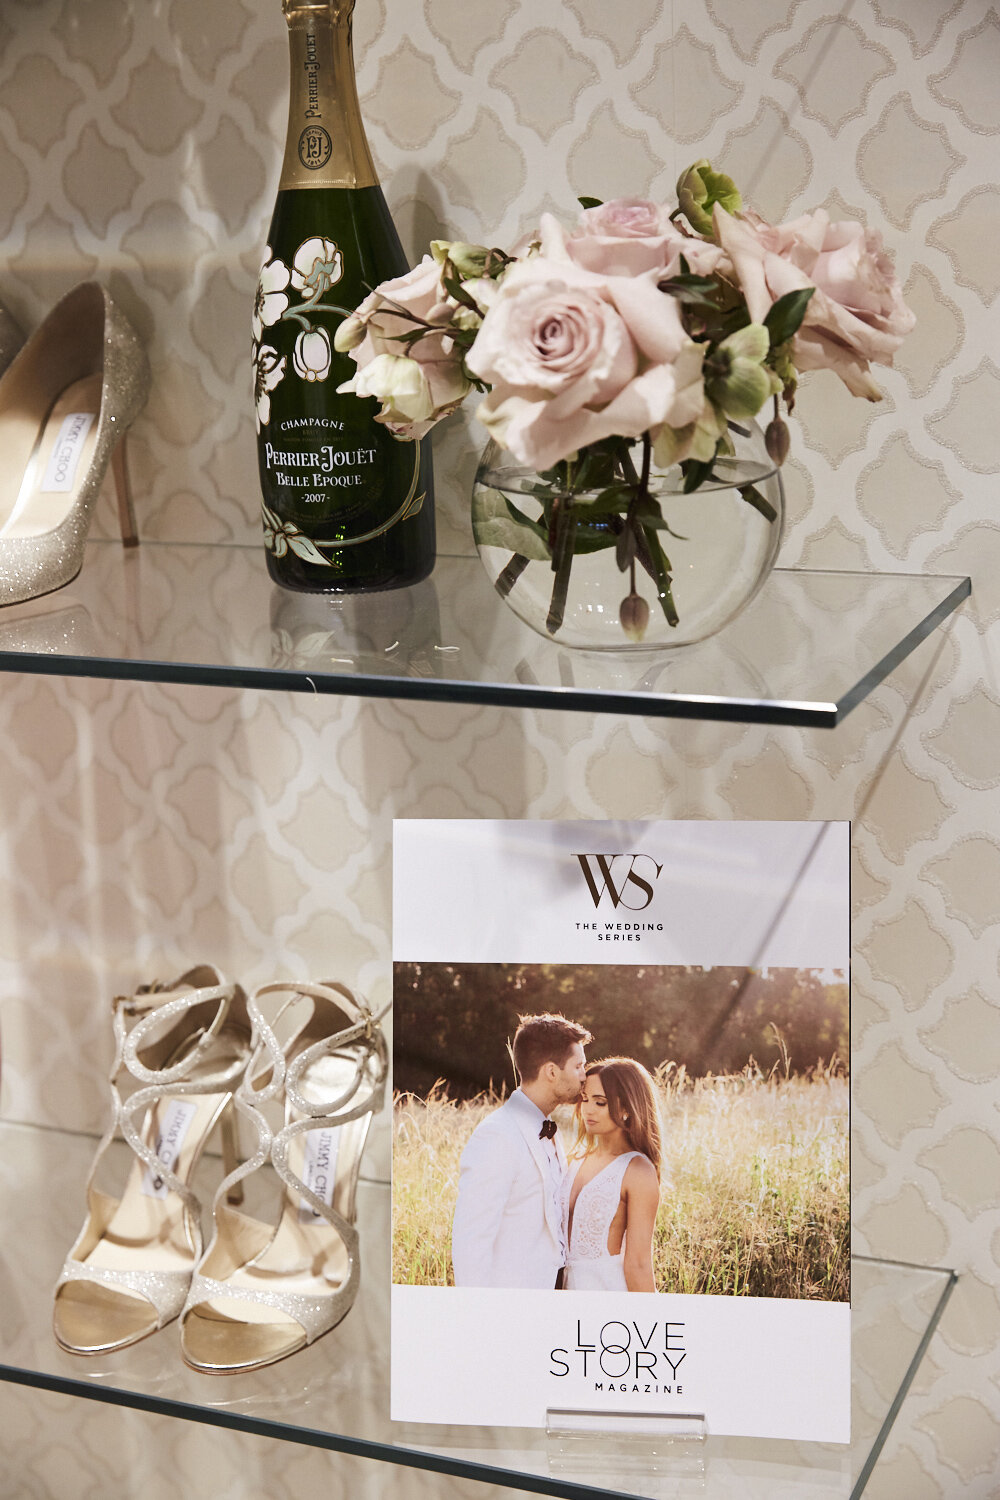 The Wedding Series Magazine, Perrier Jouet and Jimmy Choo heels available from David Jones